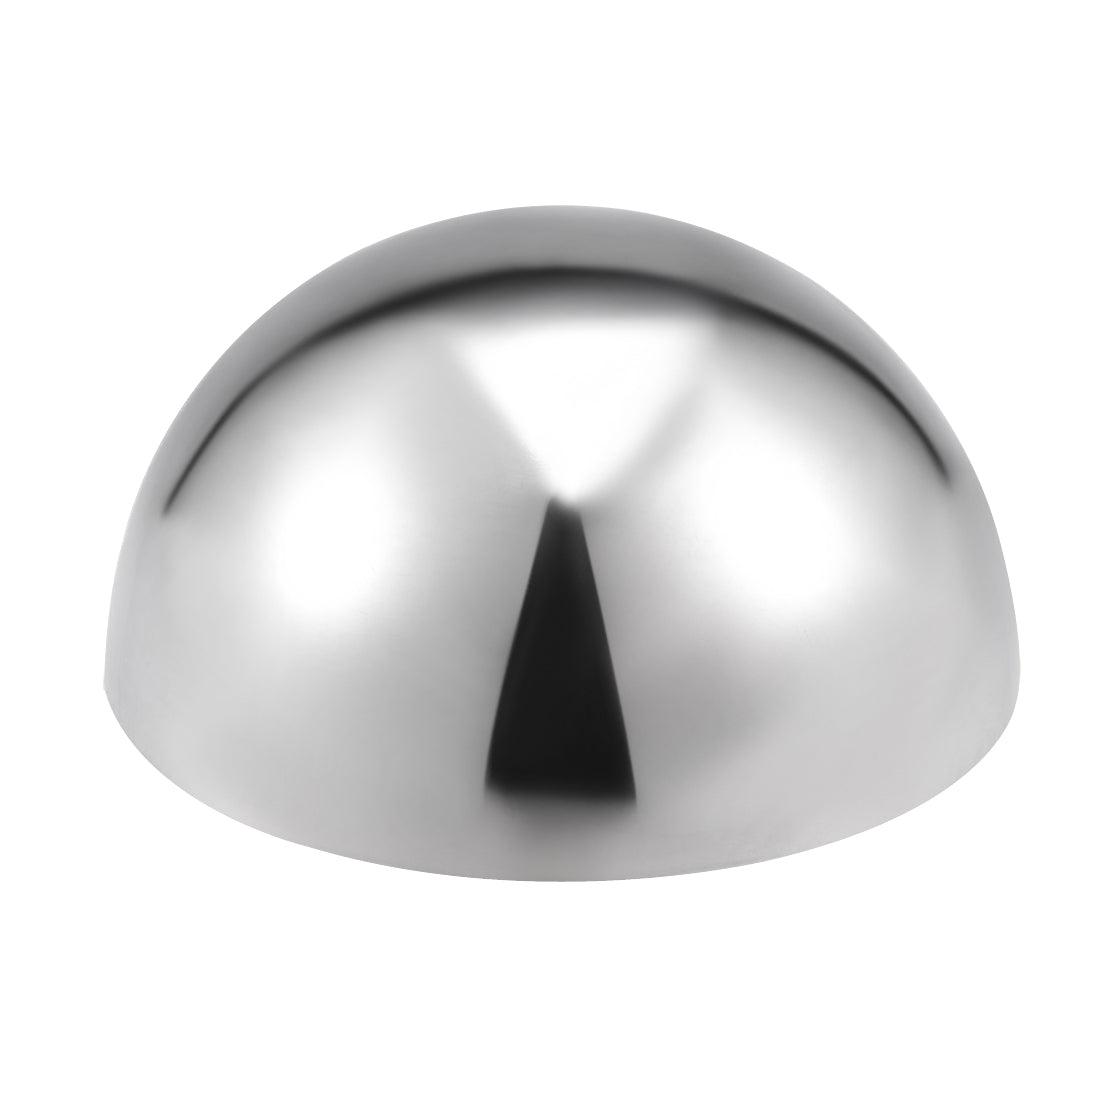 uxcell Uxcell 101mm(3.98") Dia. Decorative Hollow Half Cap Ball 304 Stainless Steel for Staircase Handrail Post 2pcs